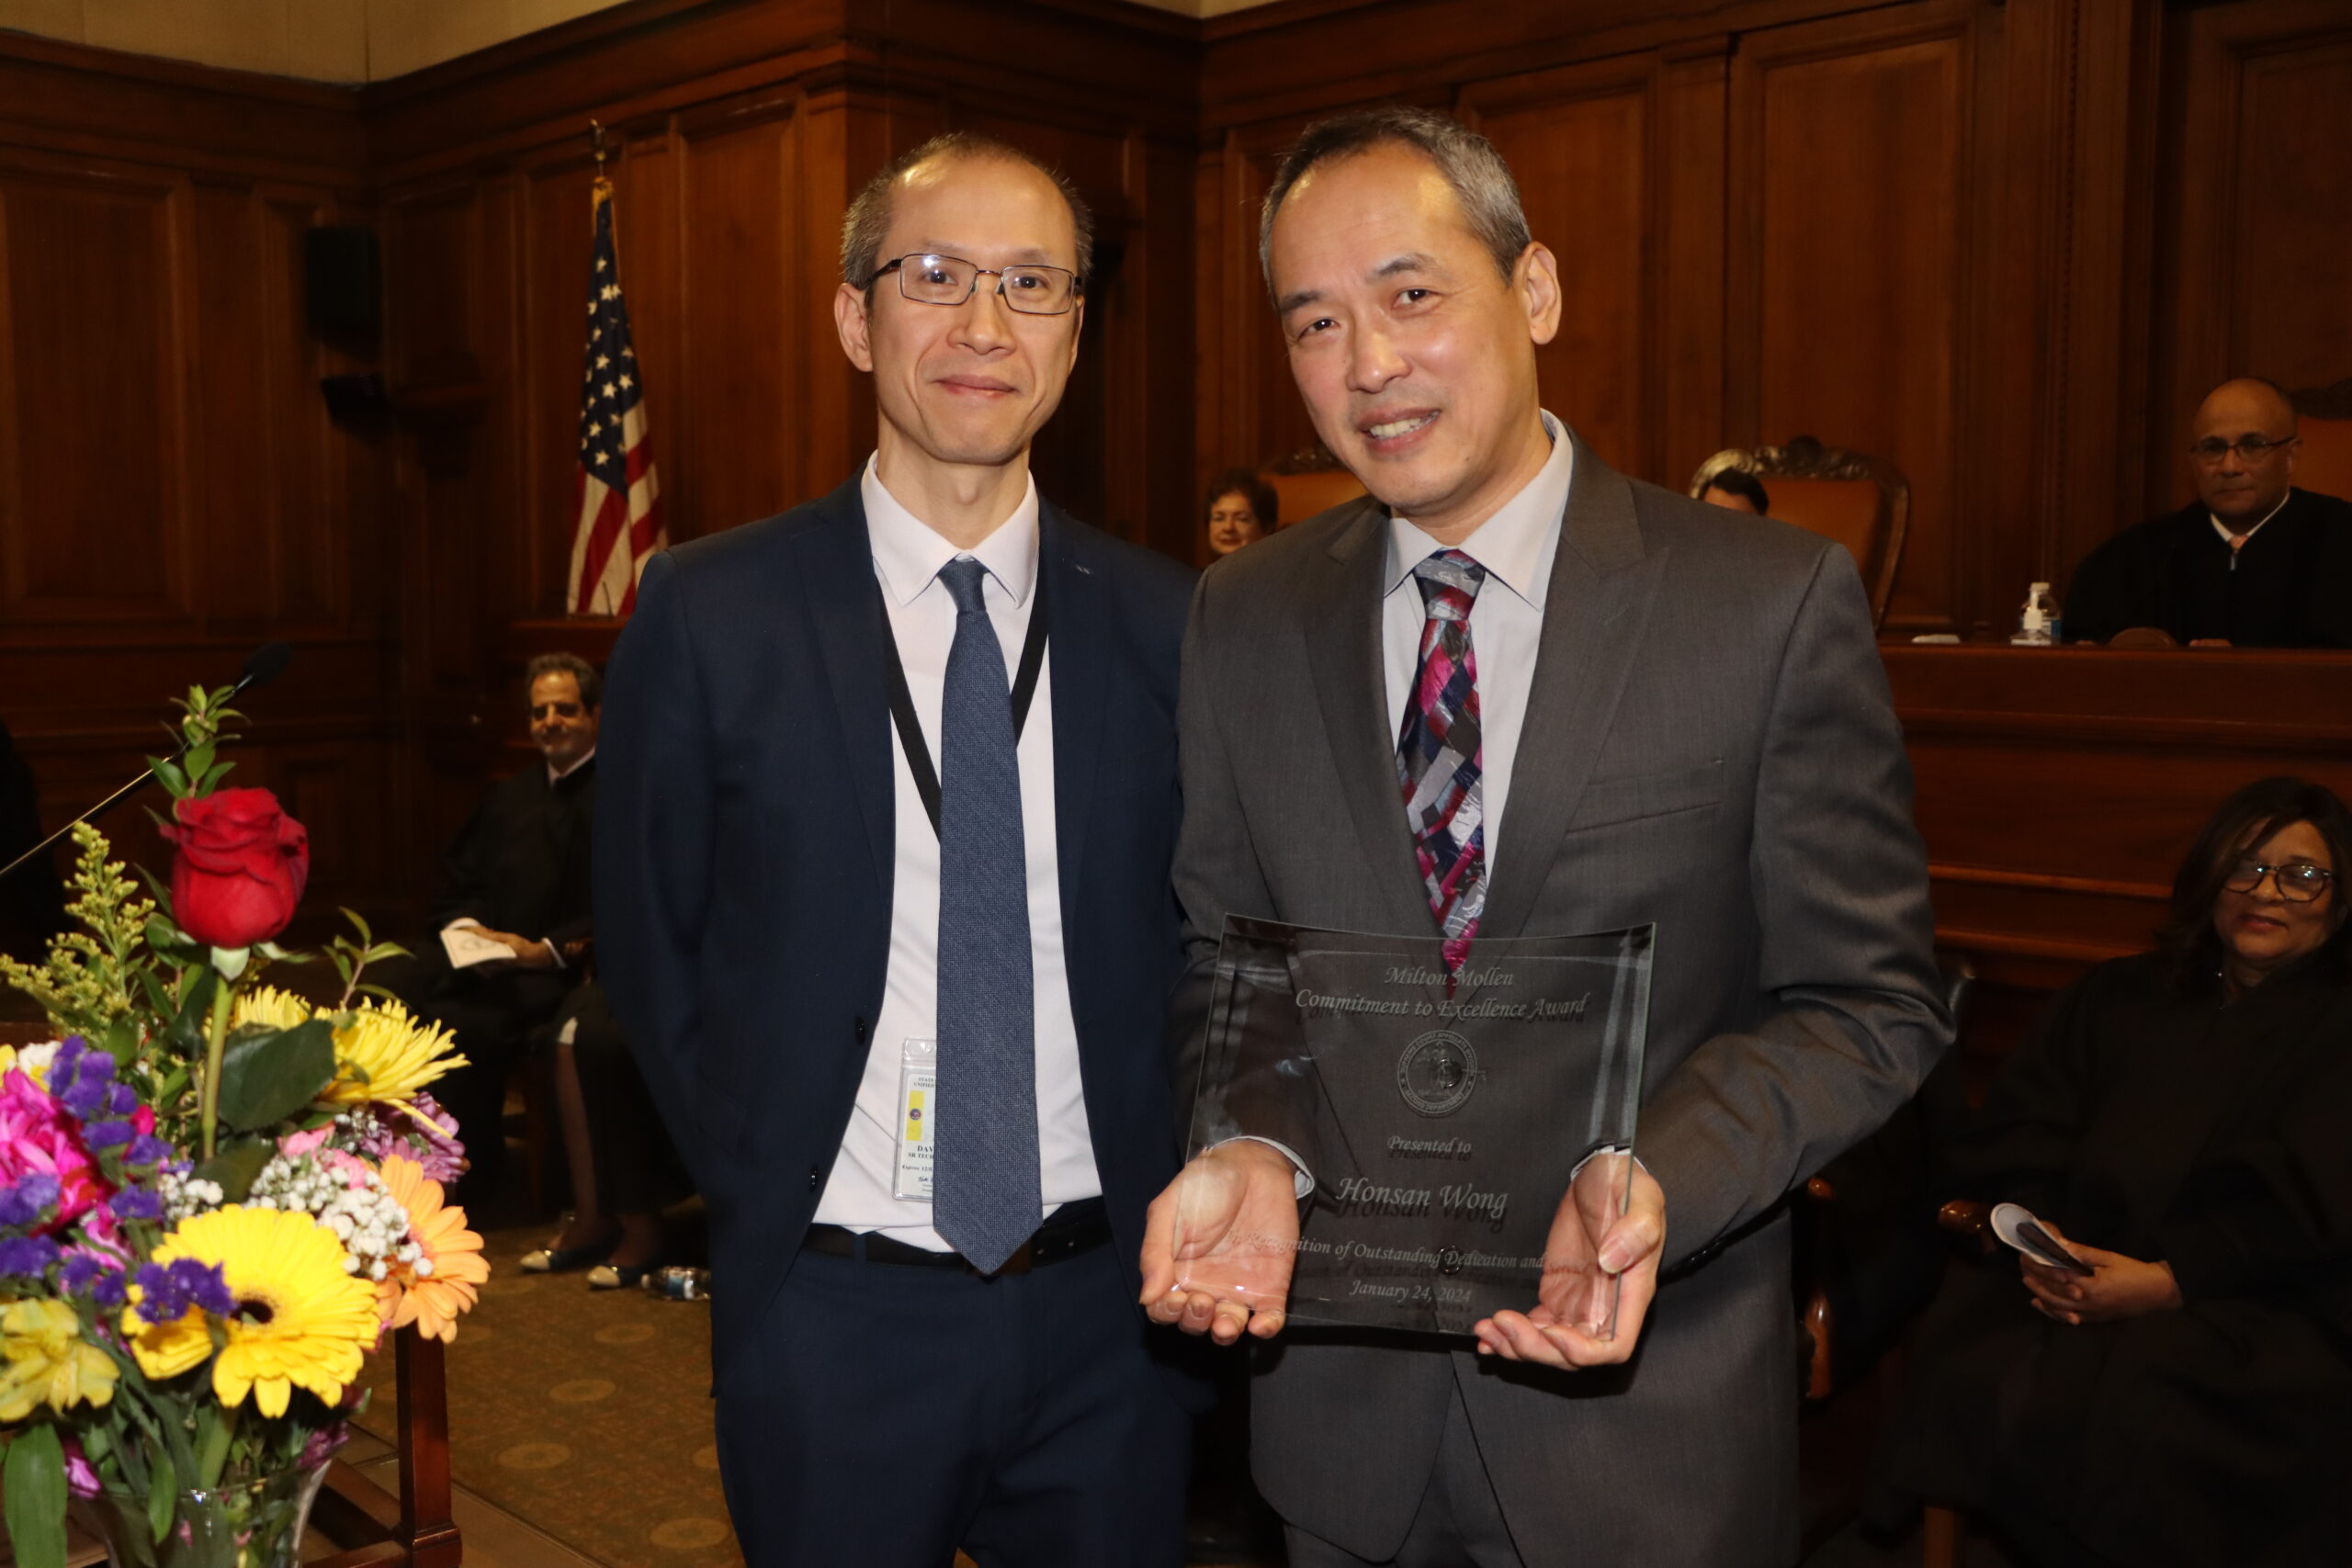 Honsan Wong (right), a senior management analyst from the Appellate Division, Second Department’s IT Department, was presented with the Mollen Award by David Lin (left), senior technical manager at Milton Mollen Commitment.